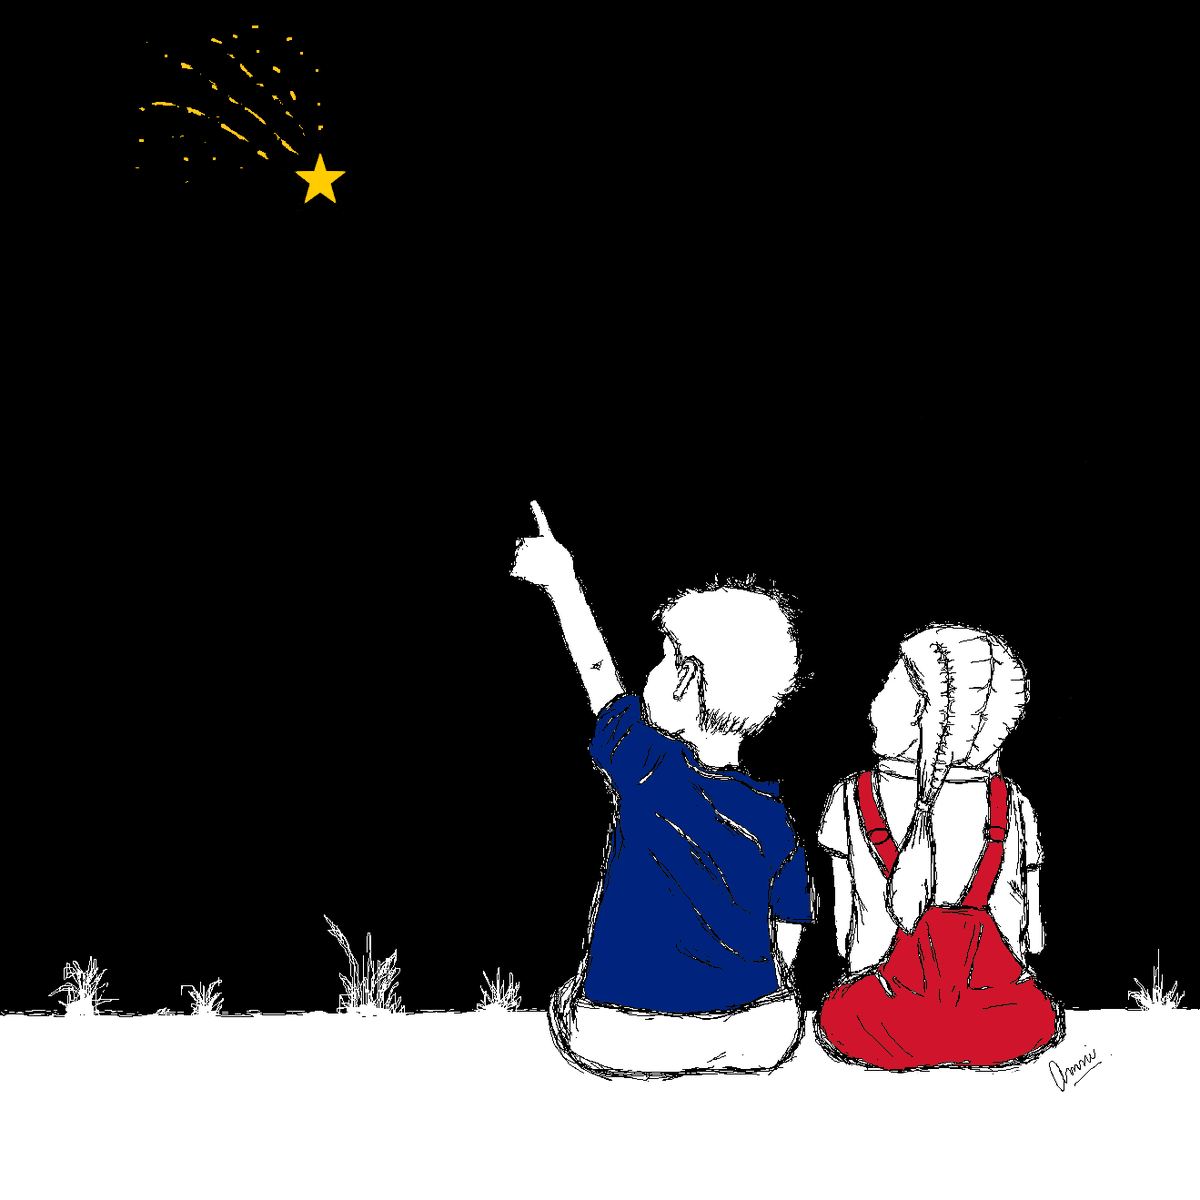 "Catch a falling star and put it in your pocketNever let it fade awayCatch a falling star and put it in your pocketSave it for a rainy day"  #Inktober  #Inktober2019  #Brexit  #catch